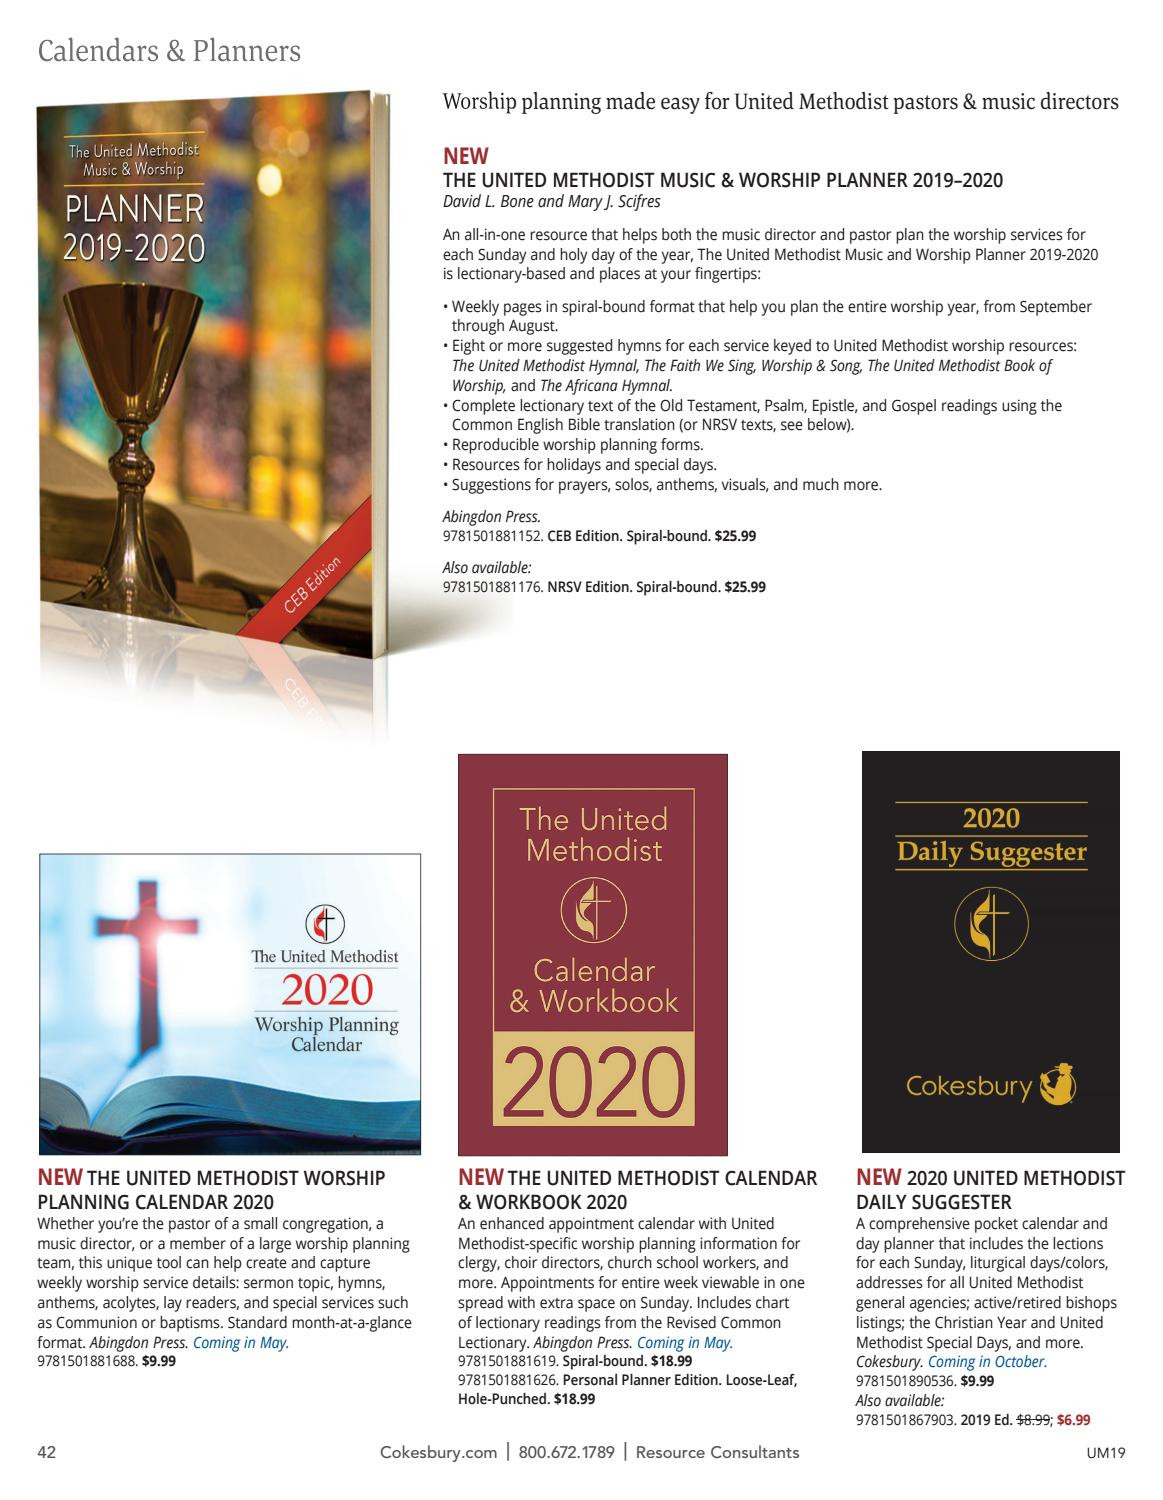 The United Methodist Church Resources For 2019 Catalog  Lectionary Readings Umc